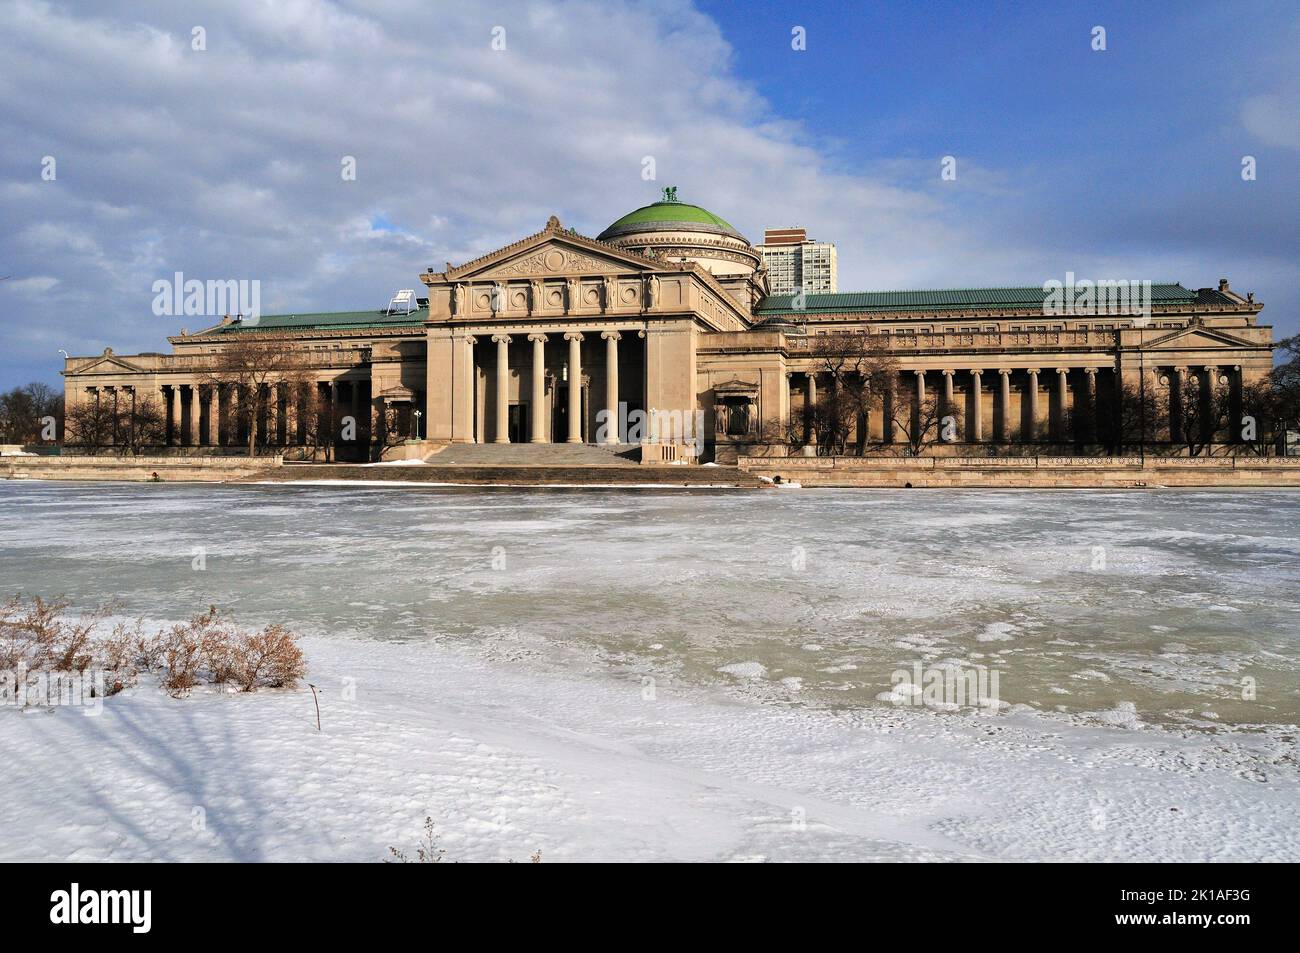 Chicago, Illinois, USA. The renowned Museum of Science & Industry pictured in winter behind a frozen lagoon in Jackson Park on the city's South Side. Stock Photo